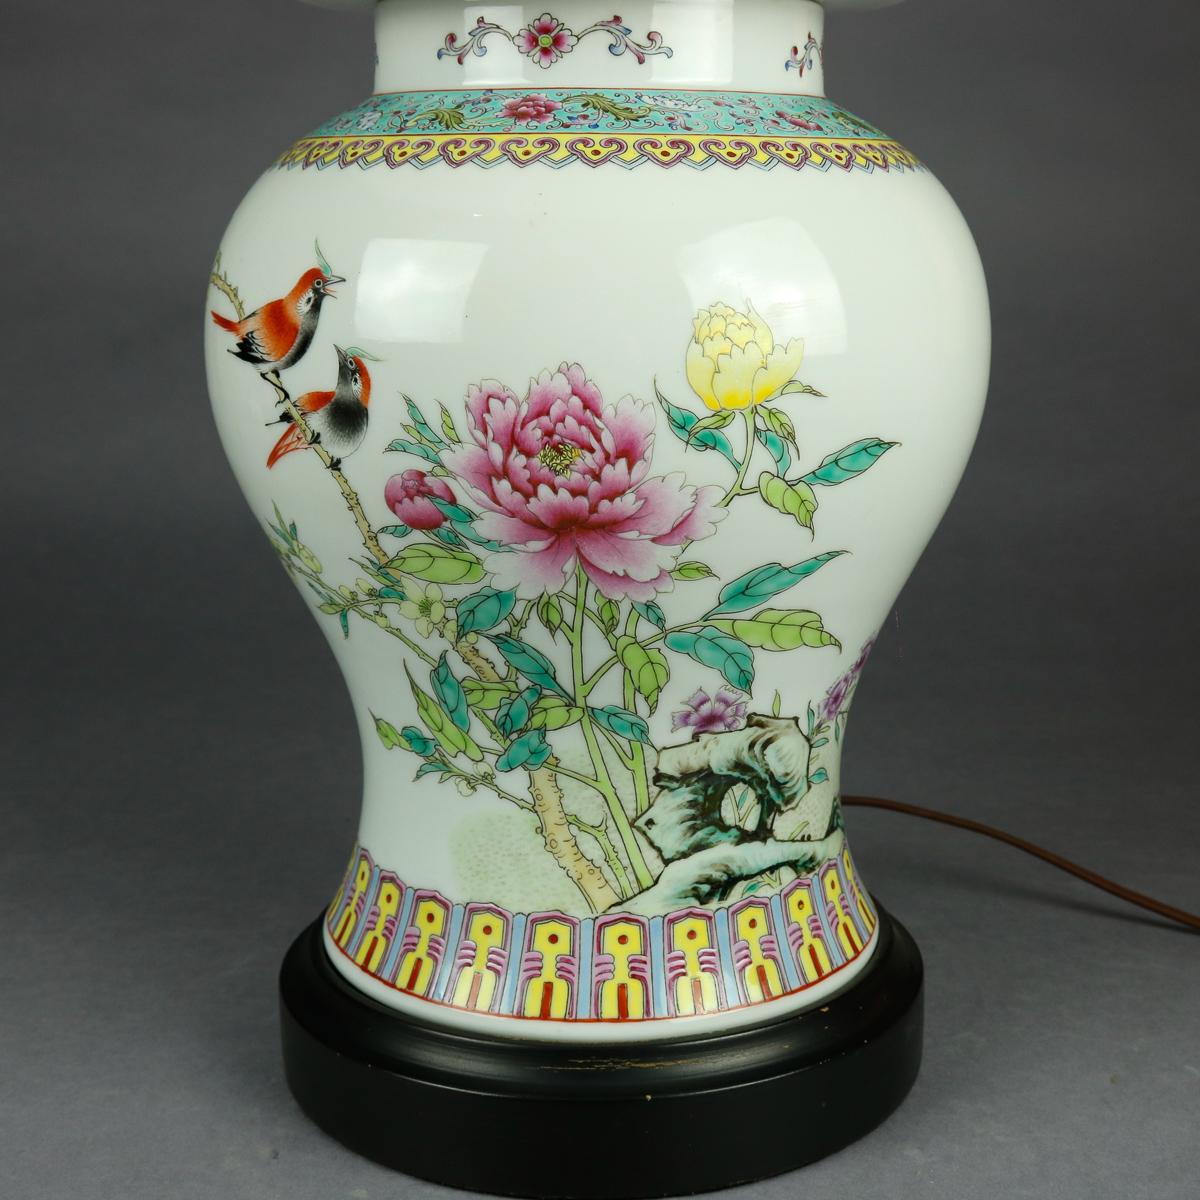 A vintage Chinese table lamp offers lidded porcelain ginger jar in hourglass form with hand painted garden scene of flowers and birds, collar with repeating stylized foliate pattern, en verso with chop mark verbiage, seated on hardwood base, 20th